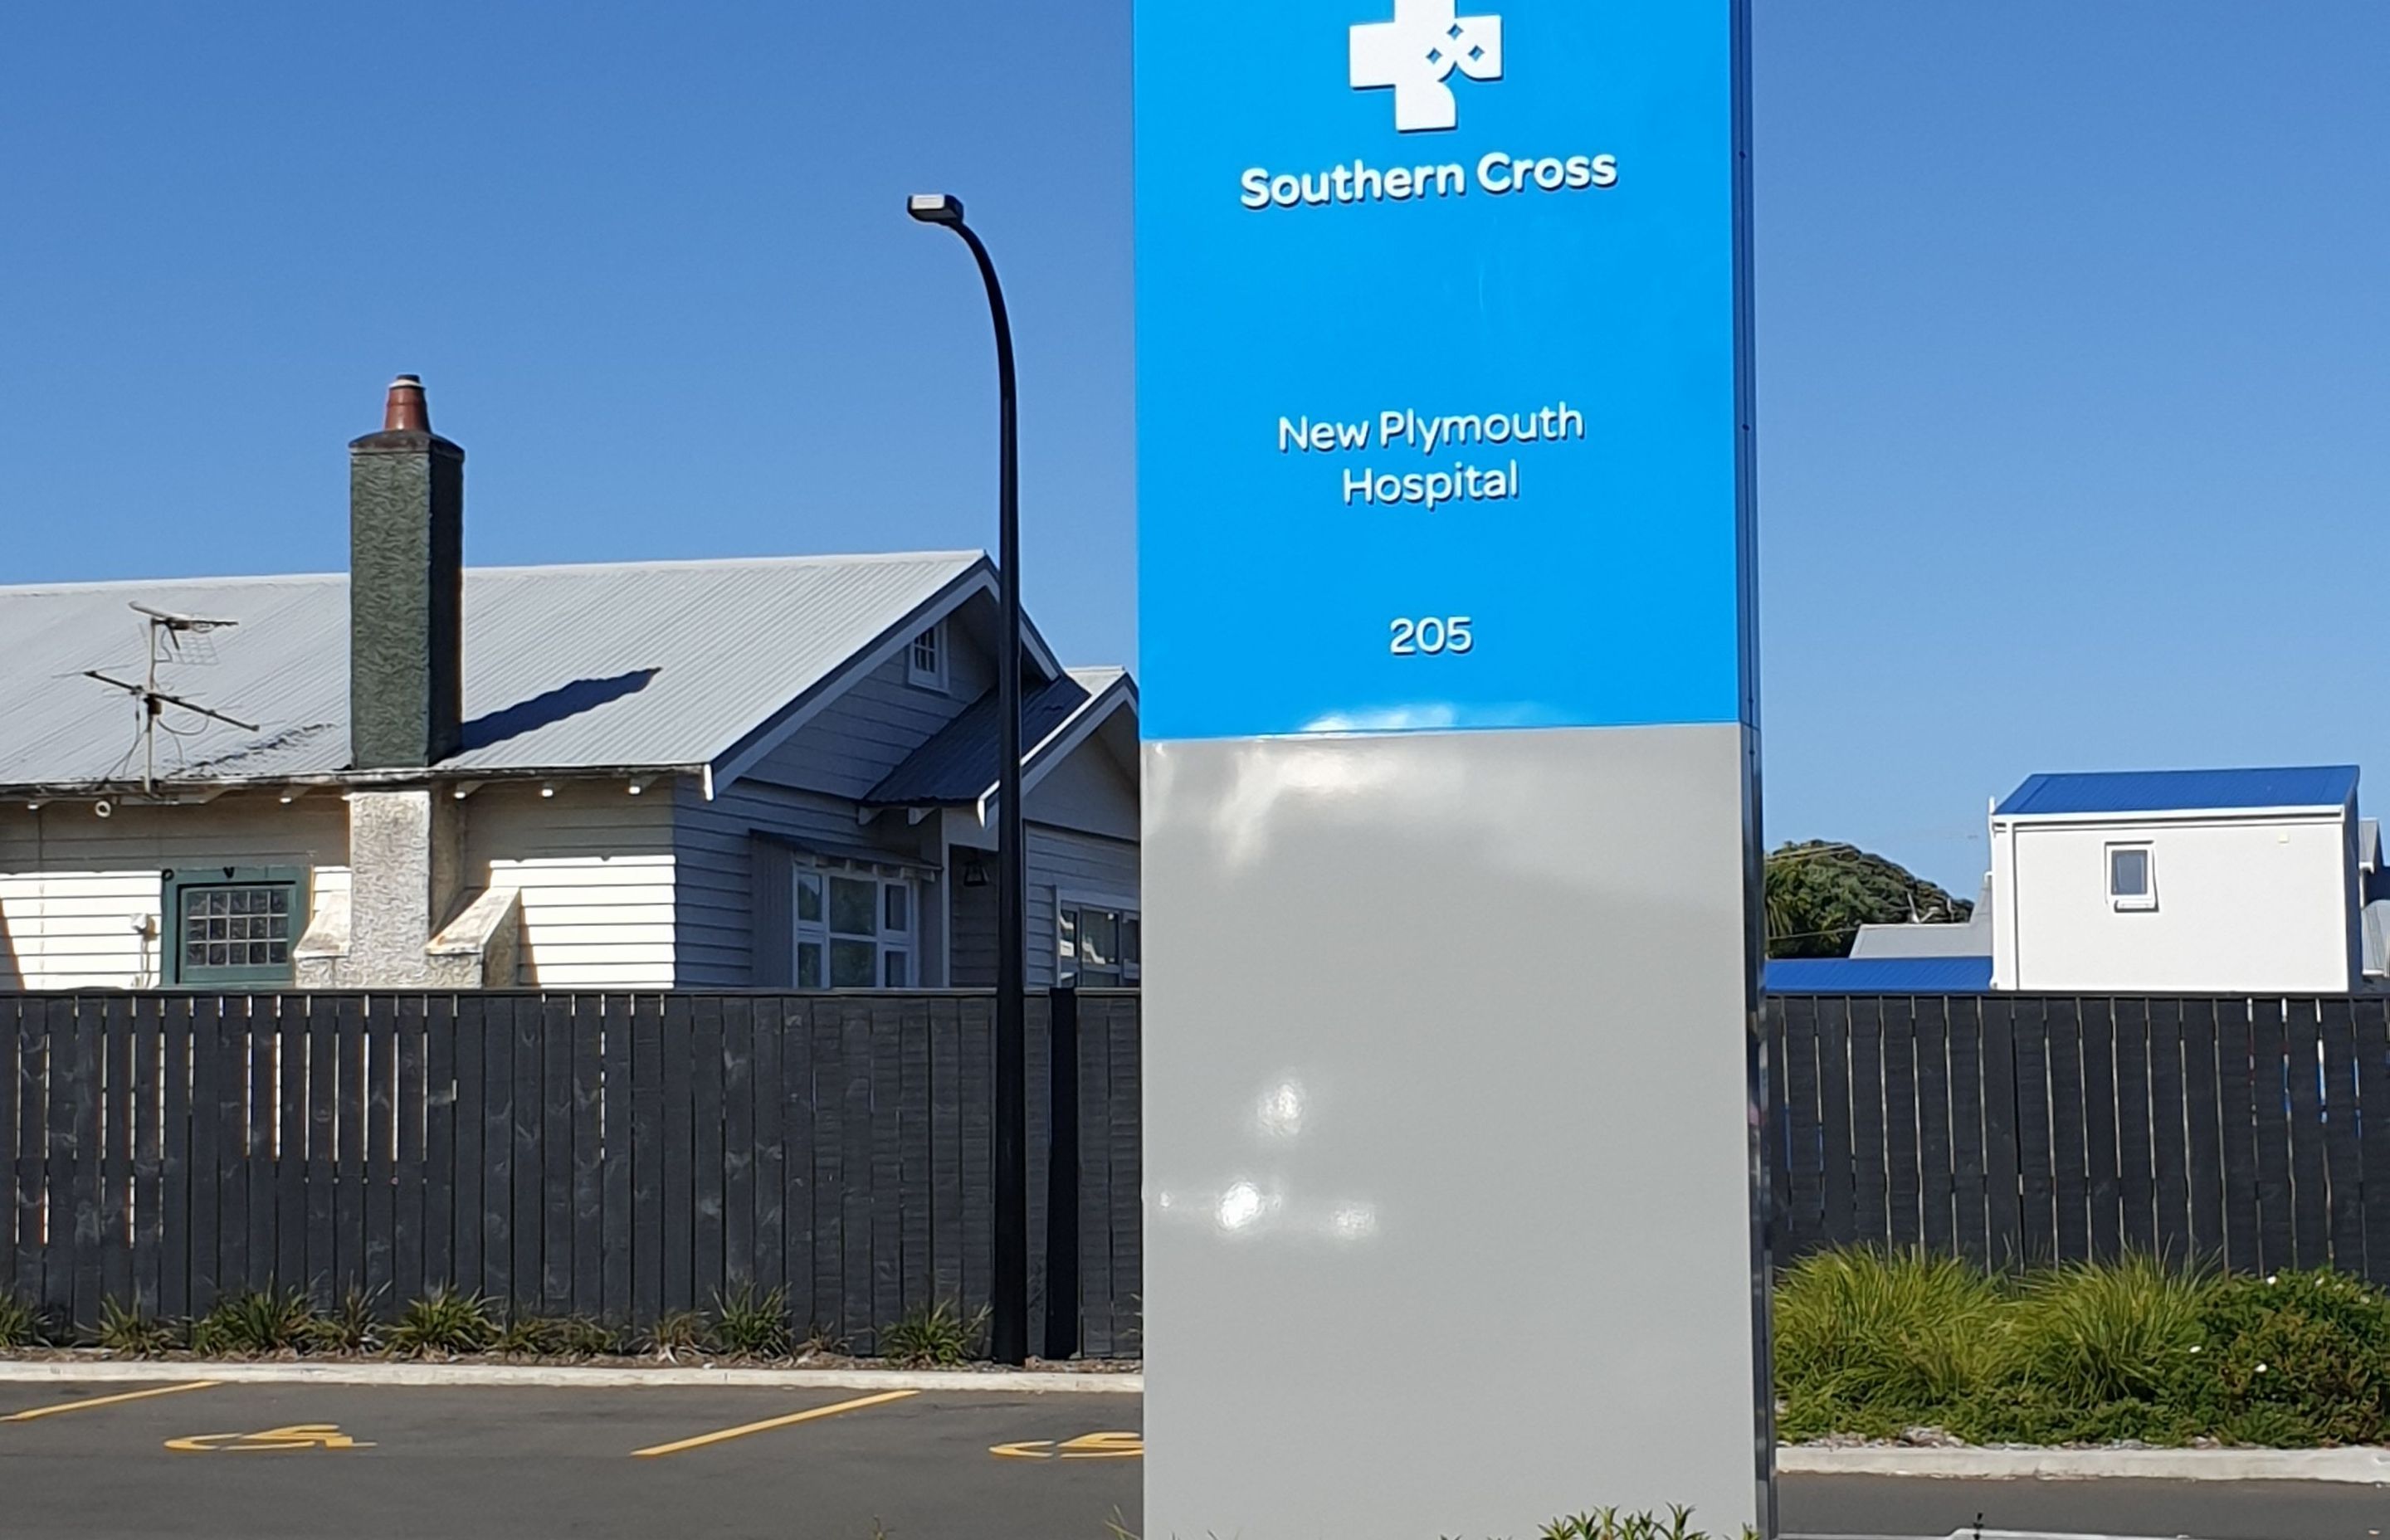 Southern Cross Hospital New Plymouth